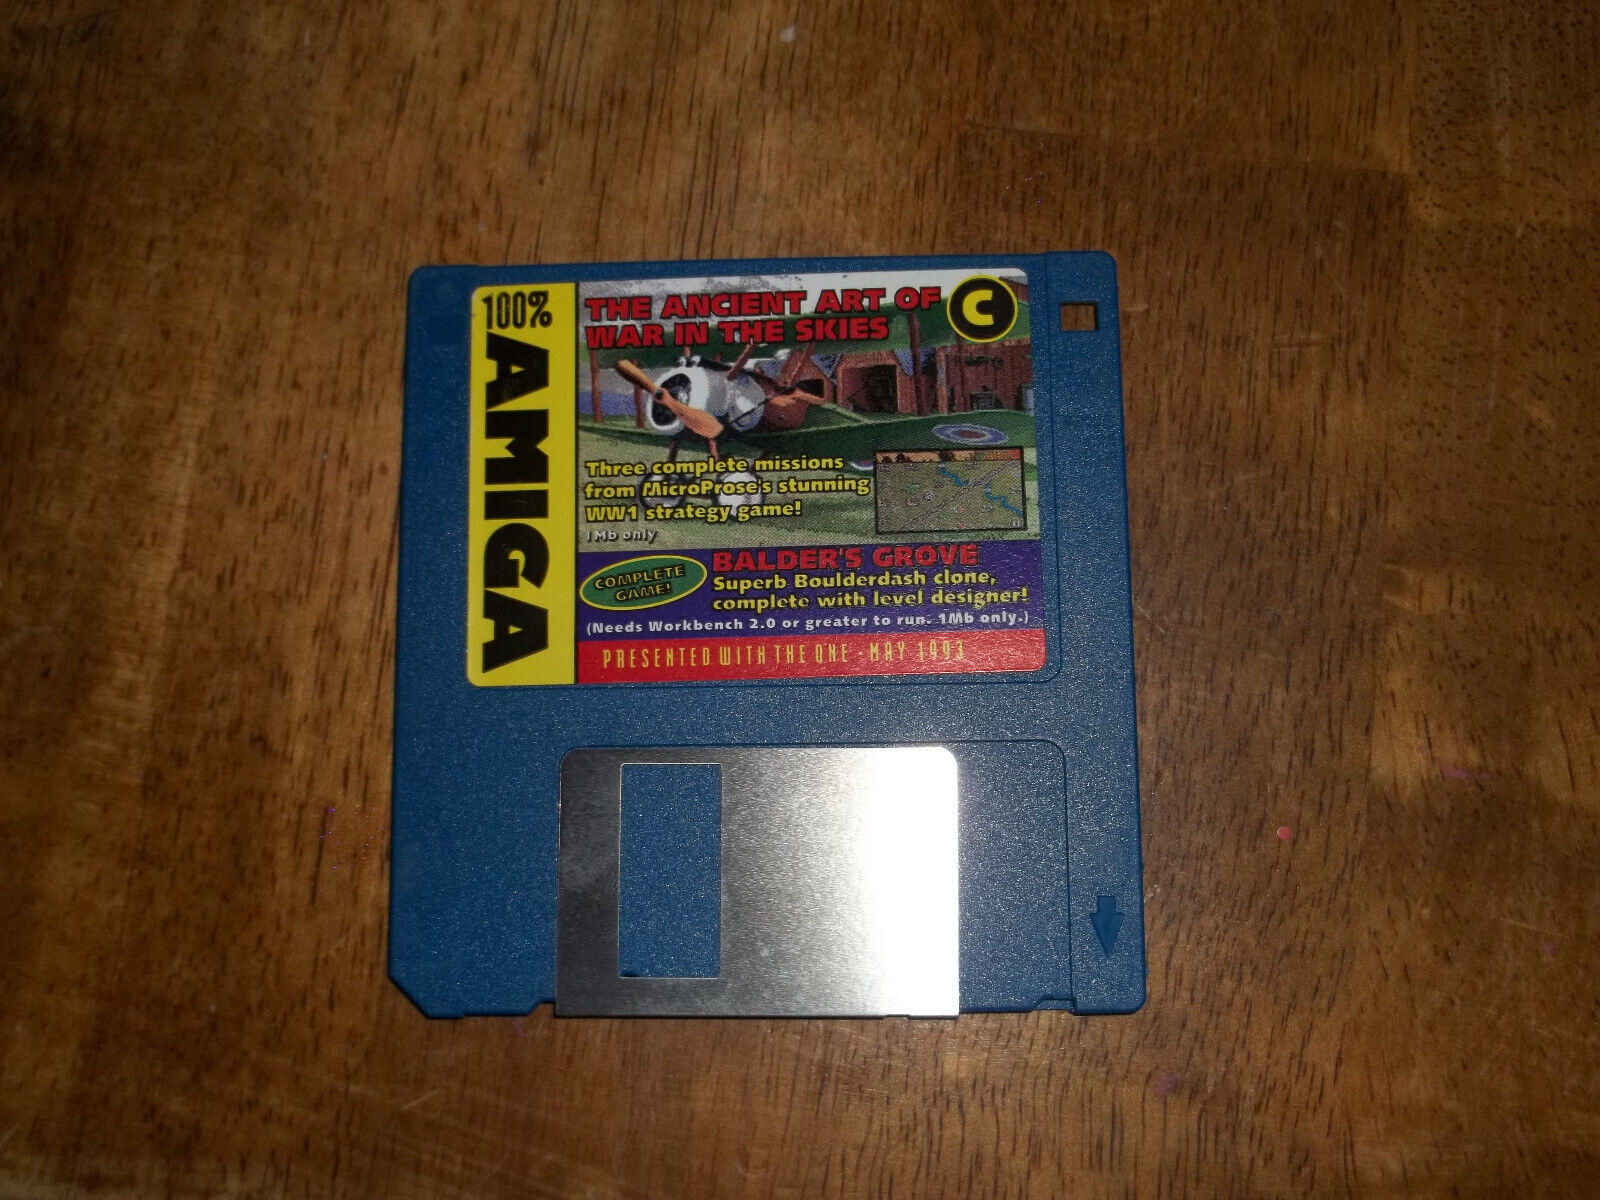 Vintage Commodore Amiga Game Disk - The Ancient Art Of War In The Skies